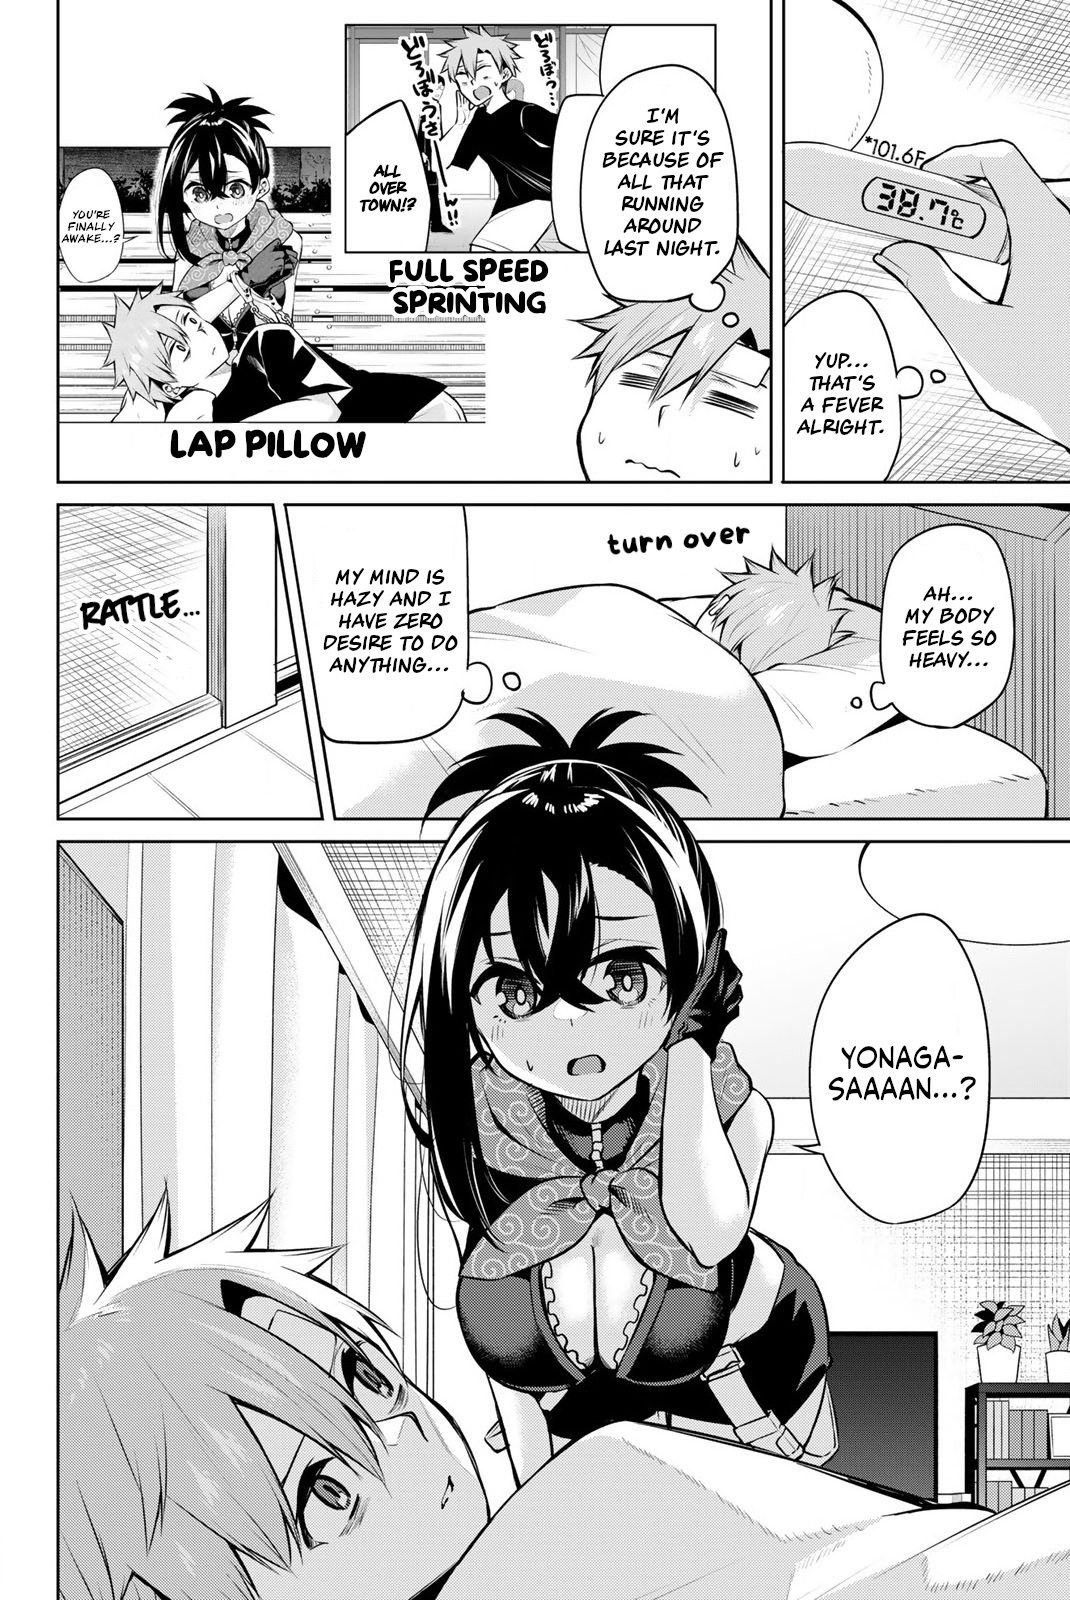 Dorobou-Chan Vol.3 Chapter 28: Dorobou-Chan And A Fever - Picture 2